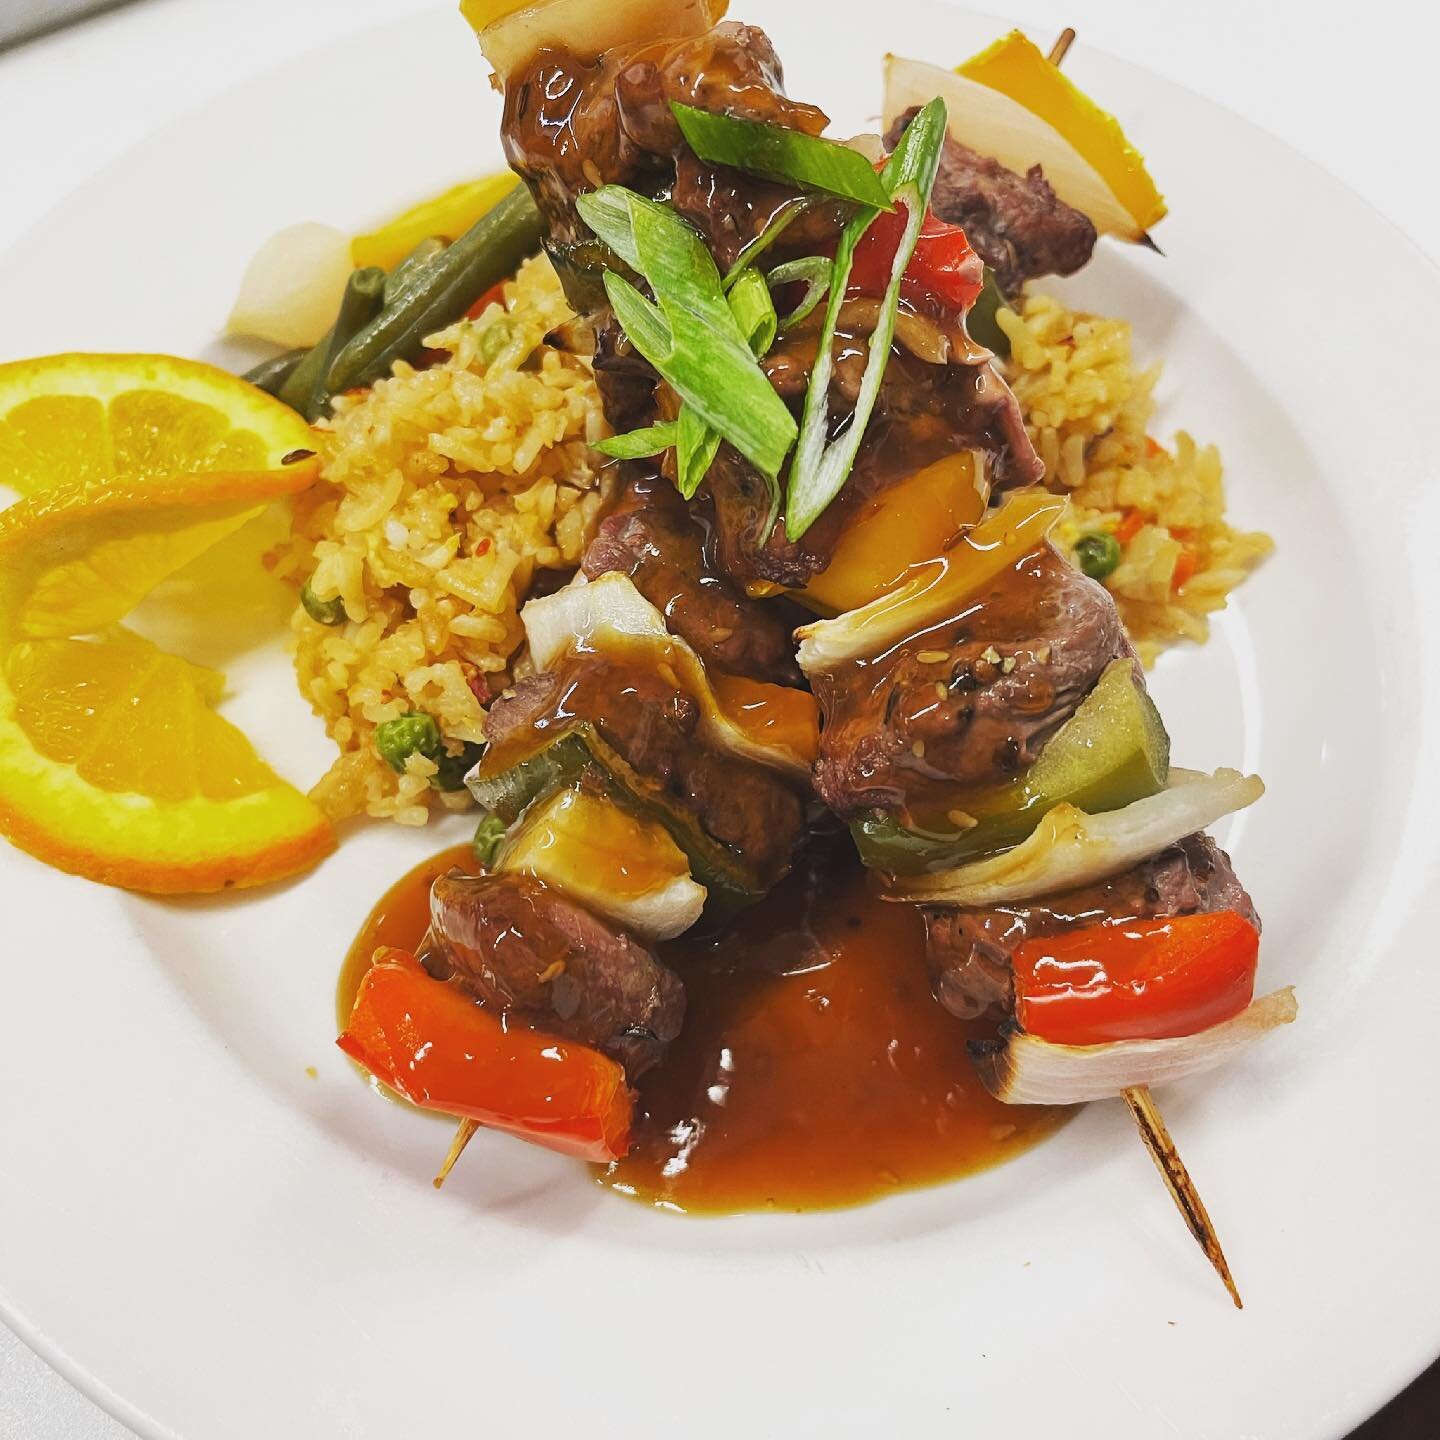 Teriyaki Beef Kebab  Paired with Sambal Fried Rice and Secret Sauce #catering #banquet  #lovebeingachef